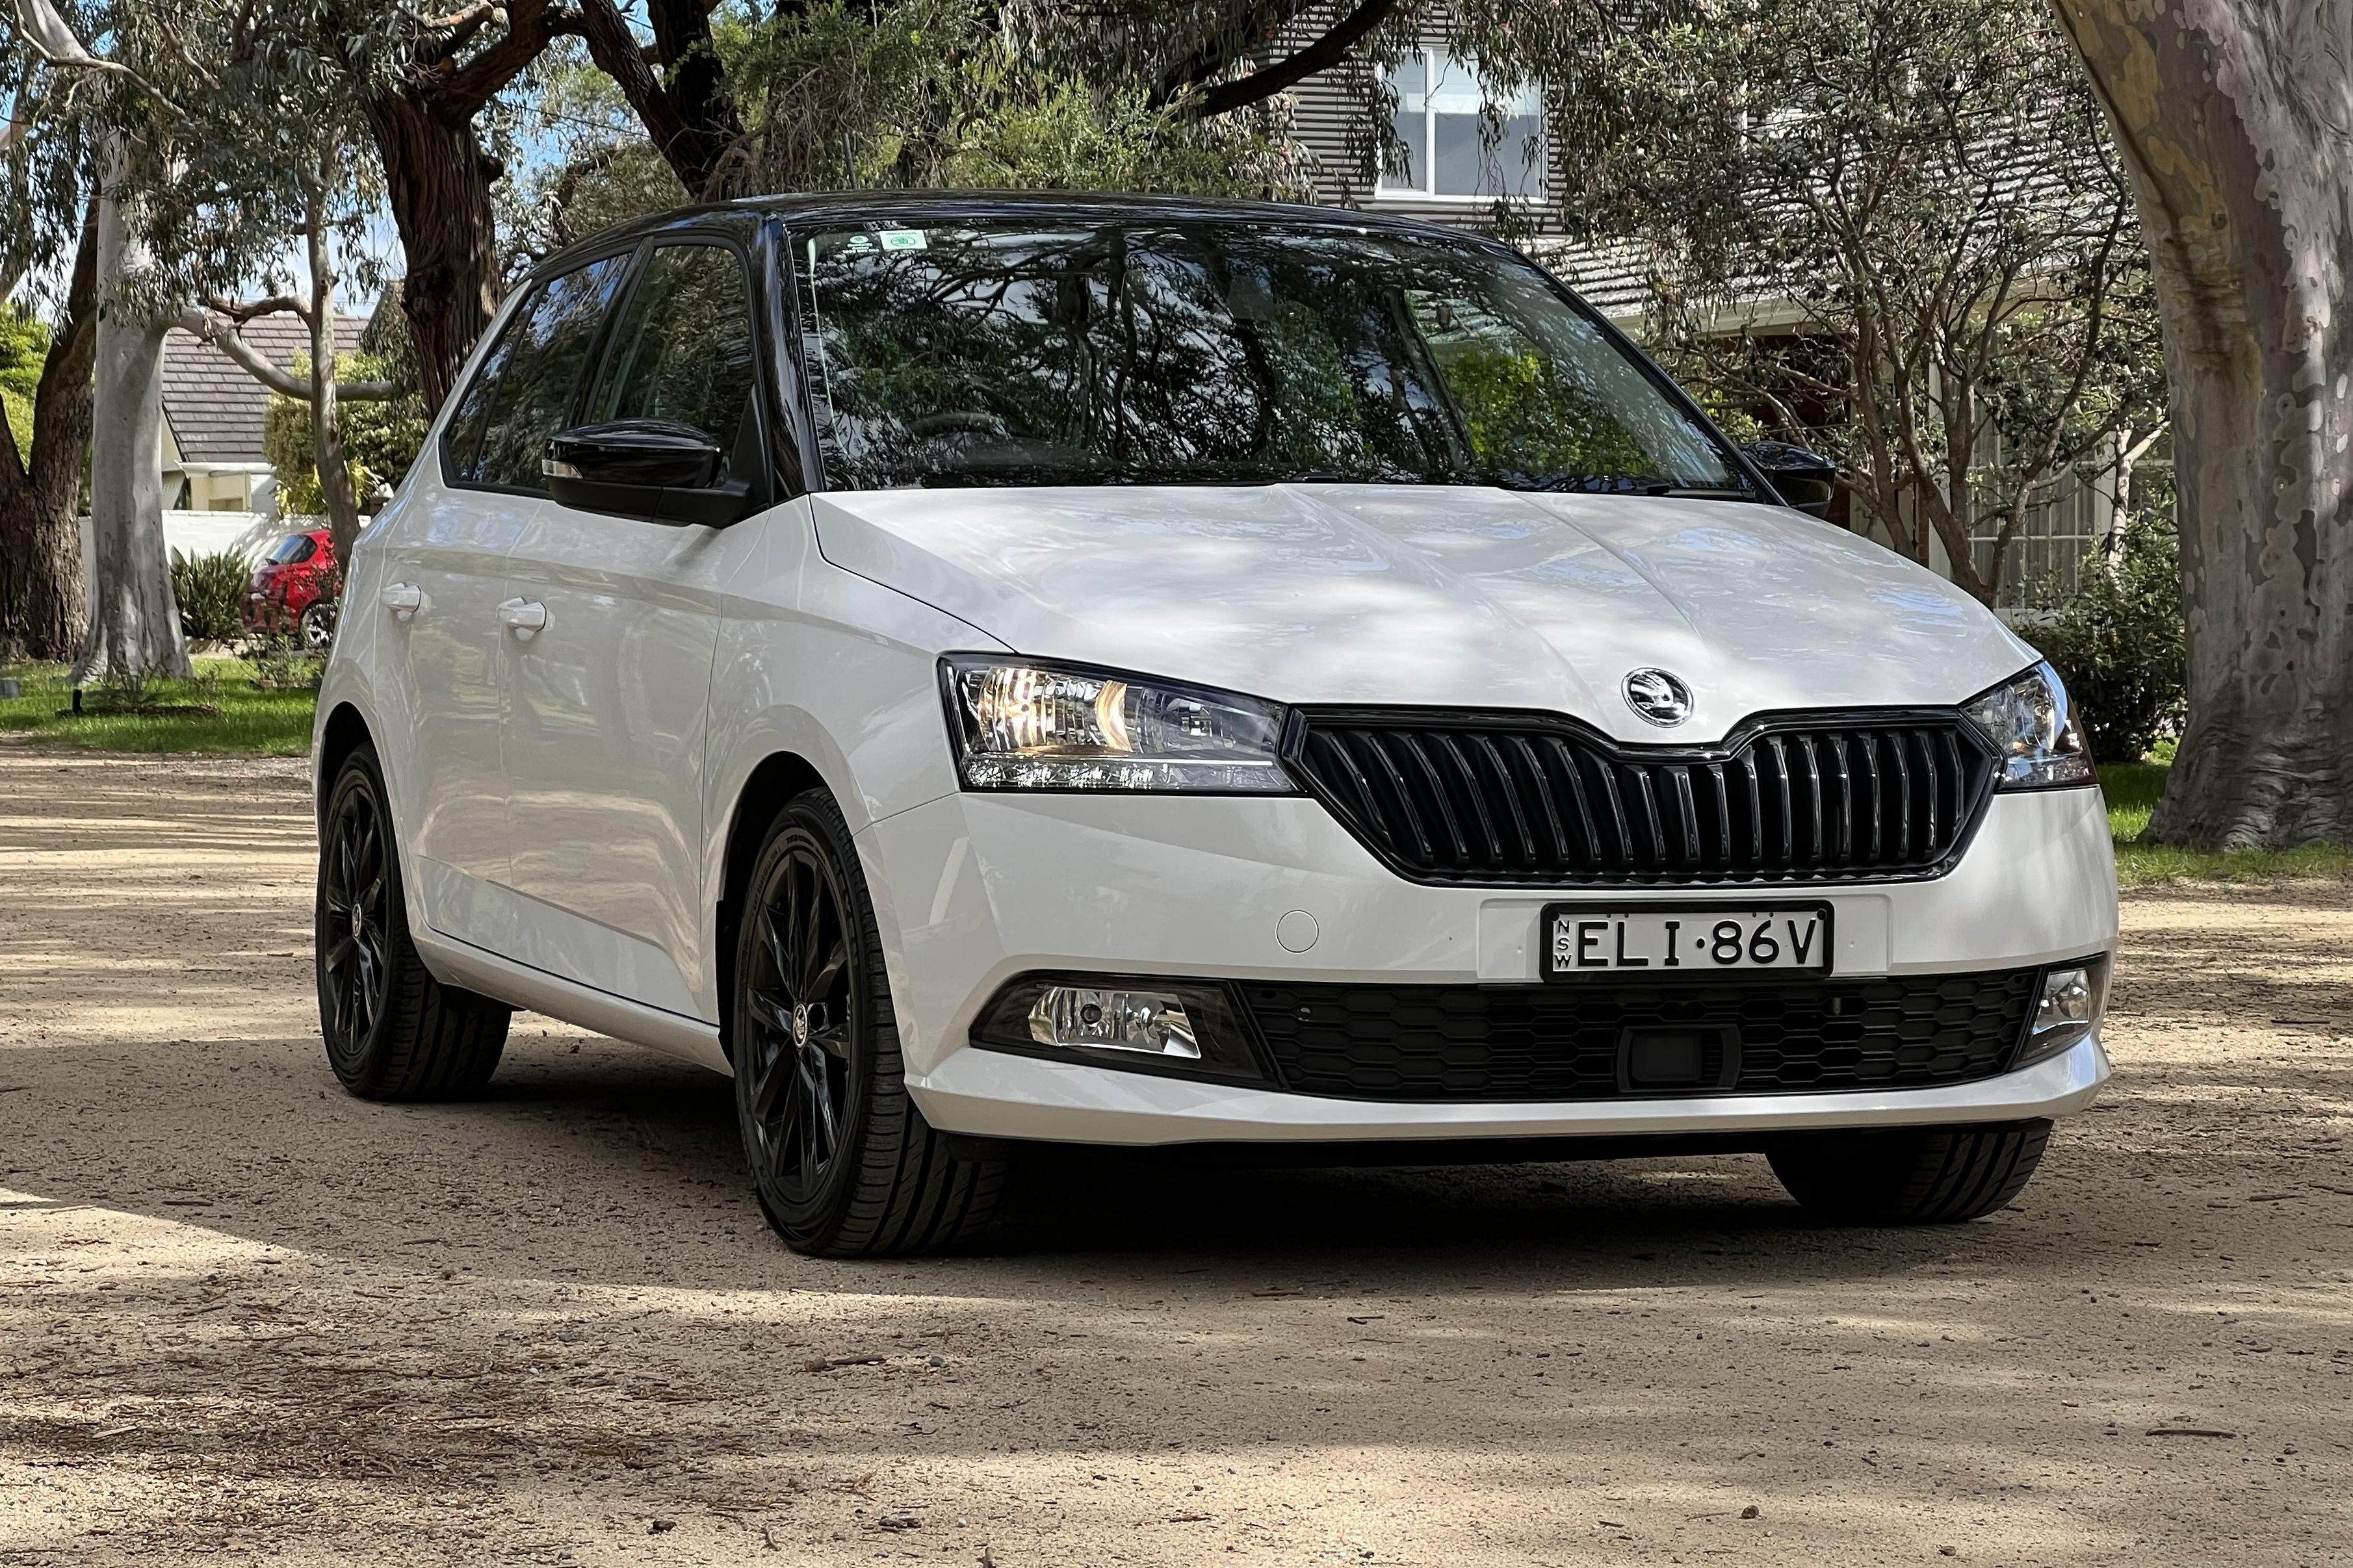 2021 Skoda Fabia Run-Out Edition review